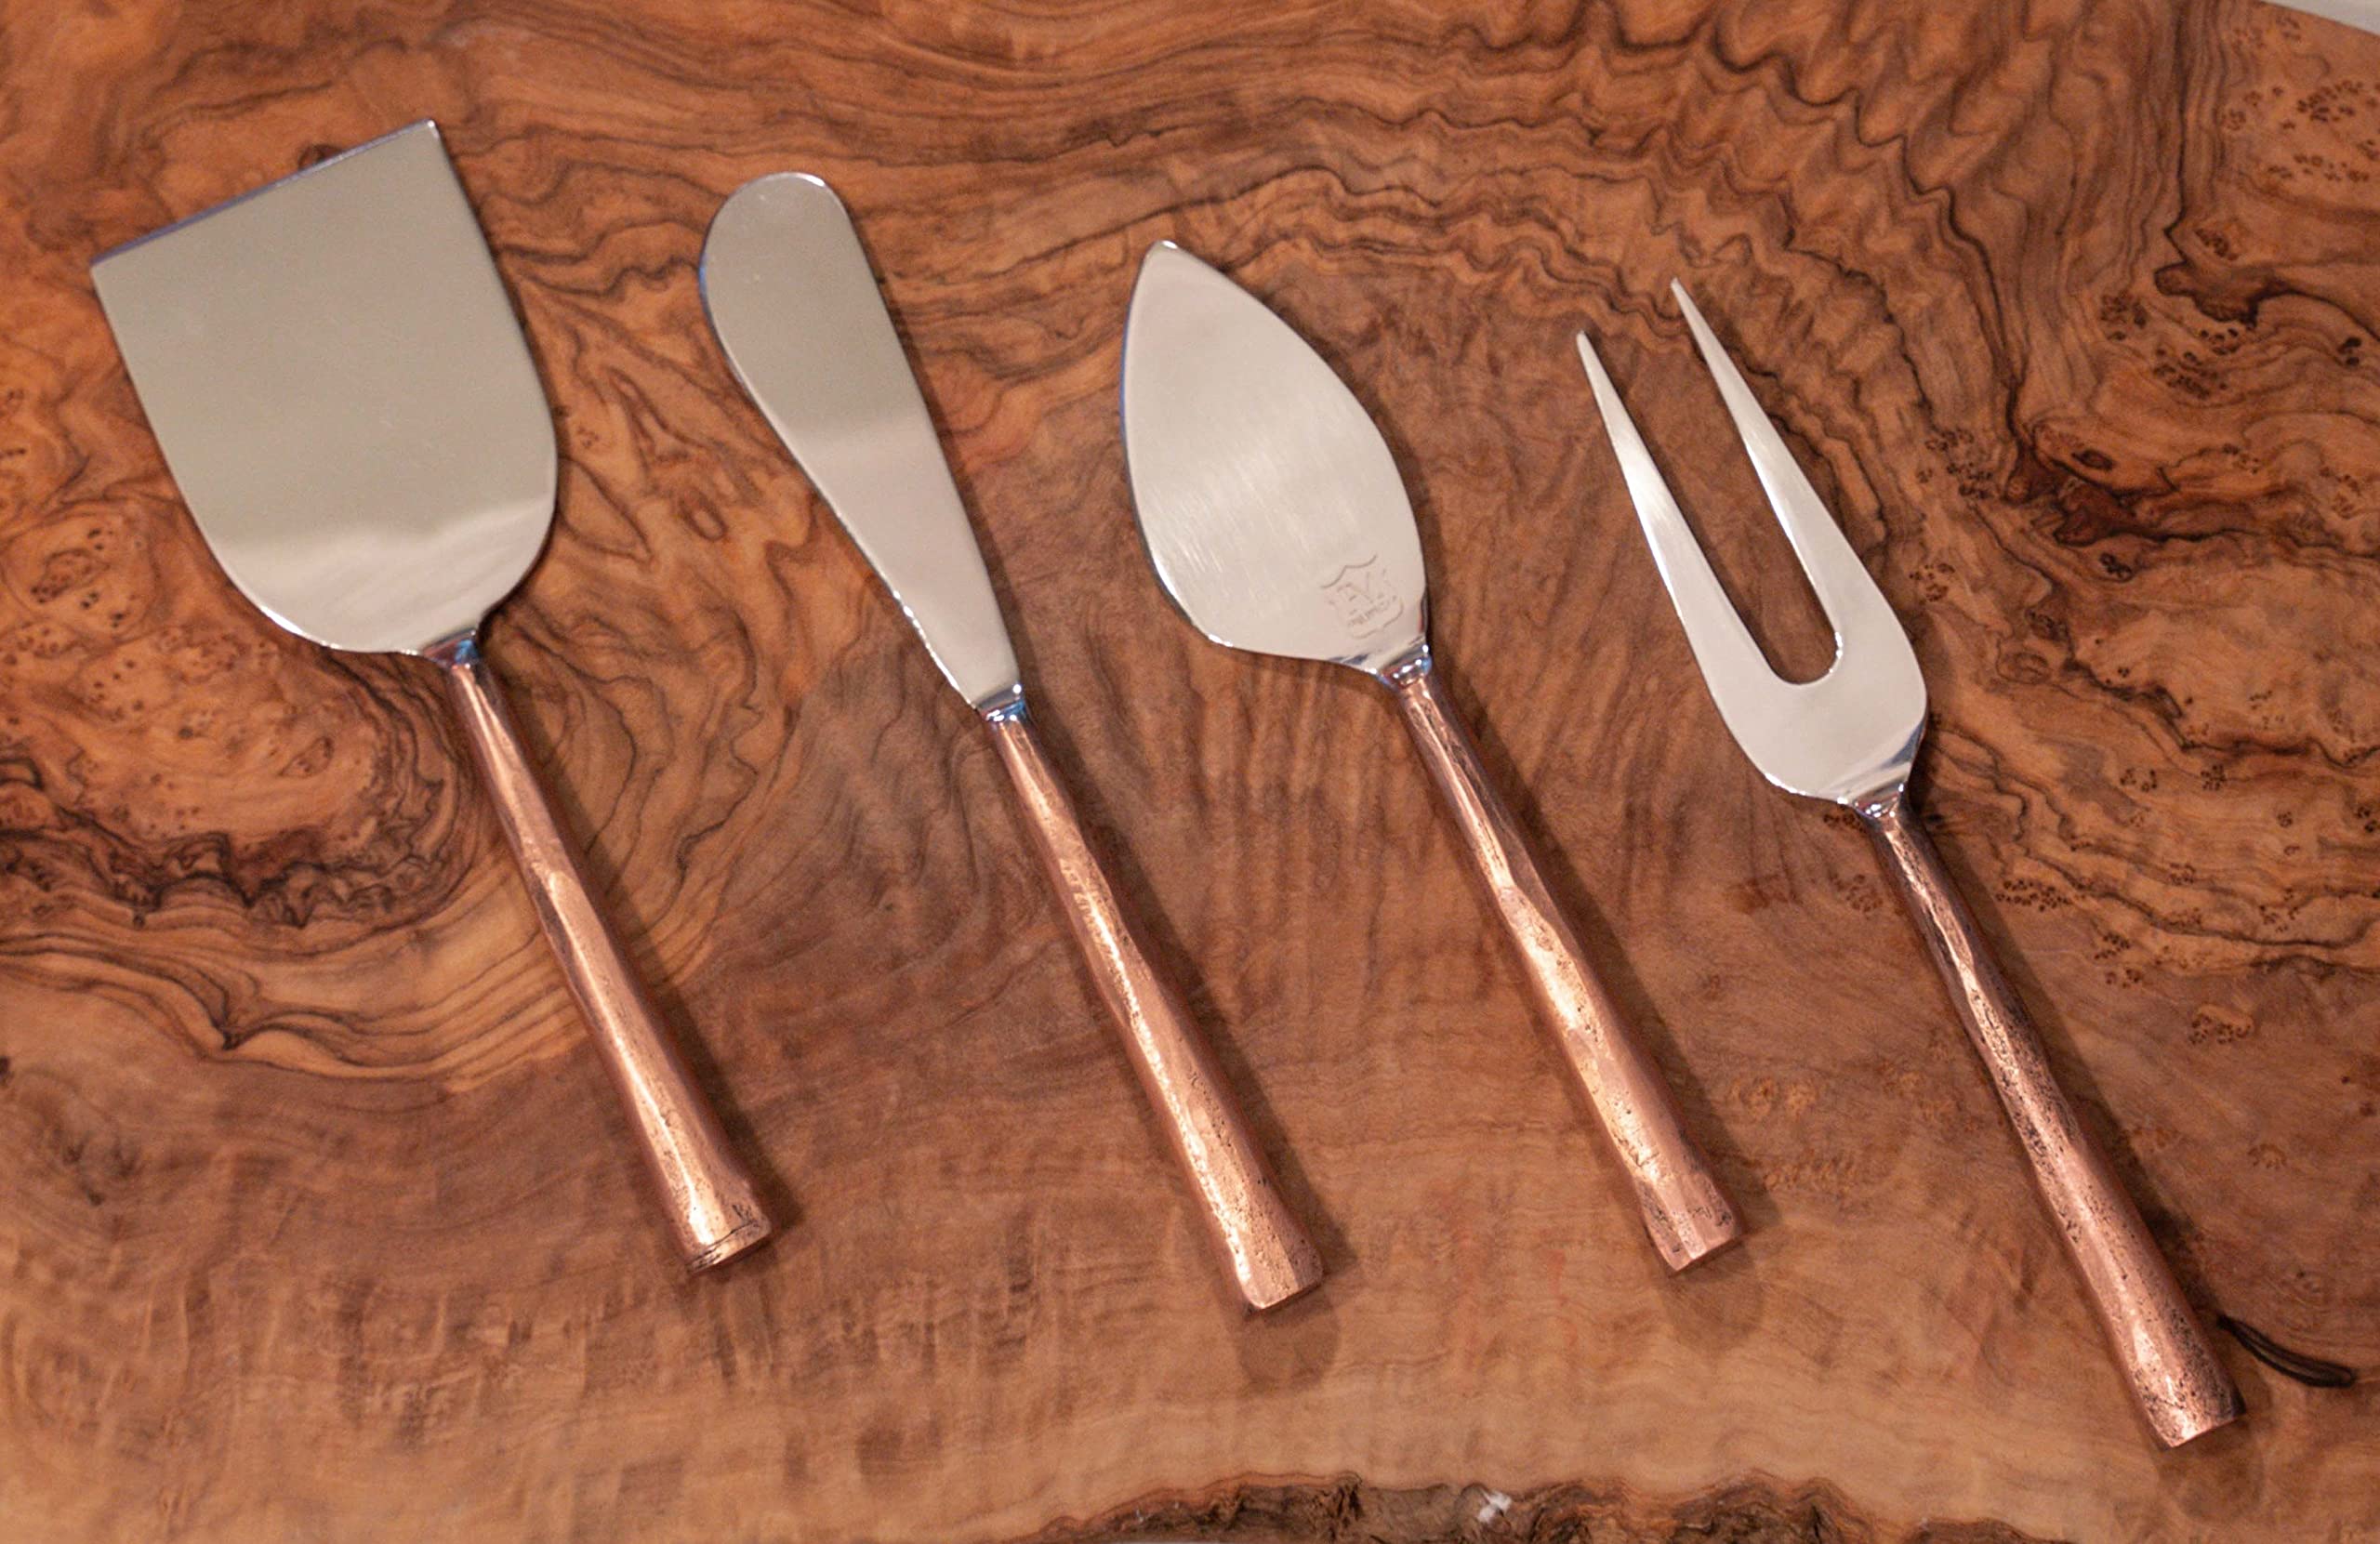 Foxglove Market Premium Cheese Knife Set - Set of 4 Hand-Forged Cheese Knives -Charcuterie Knife Set - Silver and Copper Stainless Steel - Cheese Knife Set For Charcuterie Board - Charcuterie Utensils